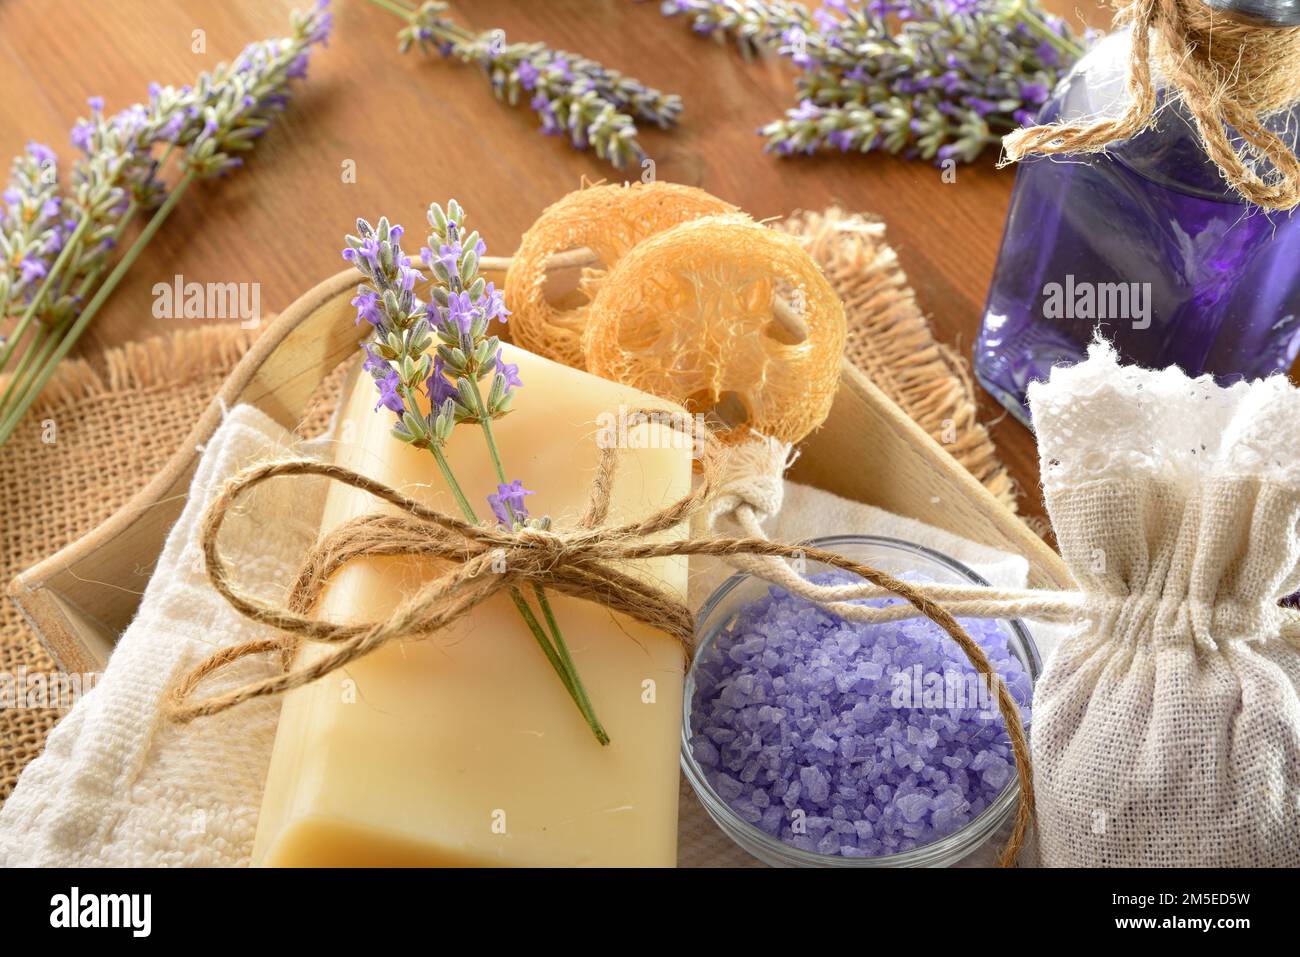 Detail of skin care products with lavender essence on wooden table. Elevated view. Stock Photo